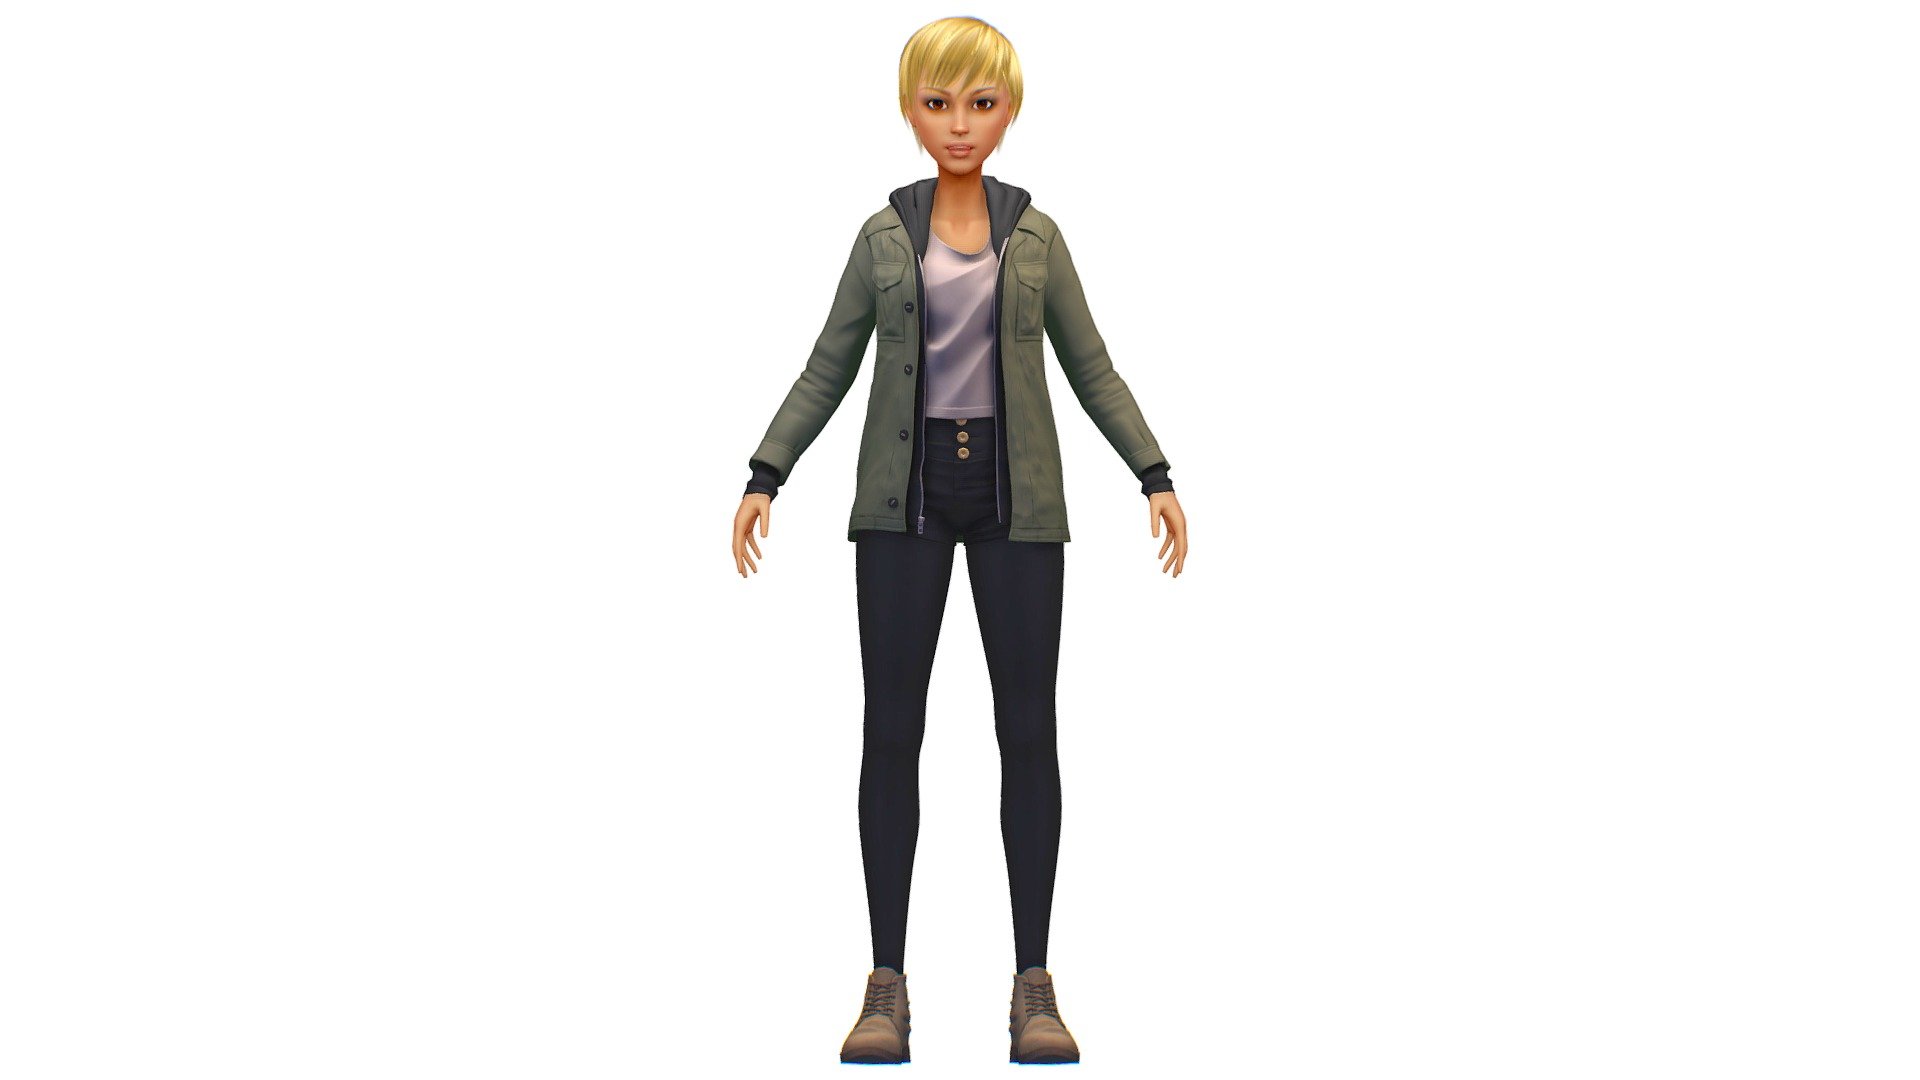 you can combine and match other combinations using the collection:

hair collection - https://skfb.ly/ovqTn

clotch collection - https://skfb.ly/ovqT7

lowpoly avatar collection - https://skfb.ly/ovqTu - Cartoon High Poly Subdivision Parka Khaki - Buy Royalty Free 3D model by Oleg Shuldiakov (@olegshuldiakov) 3d model